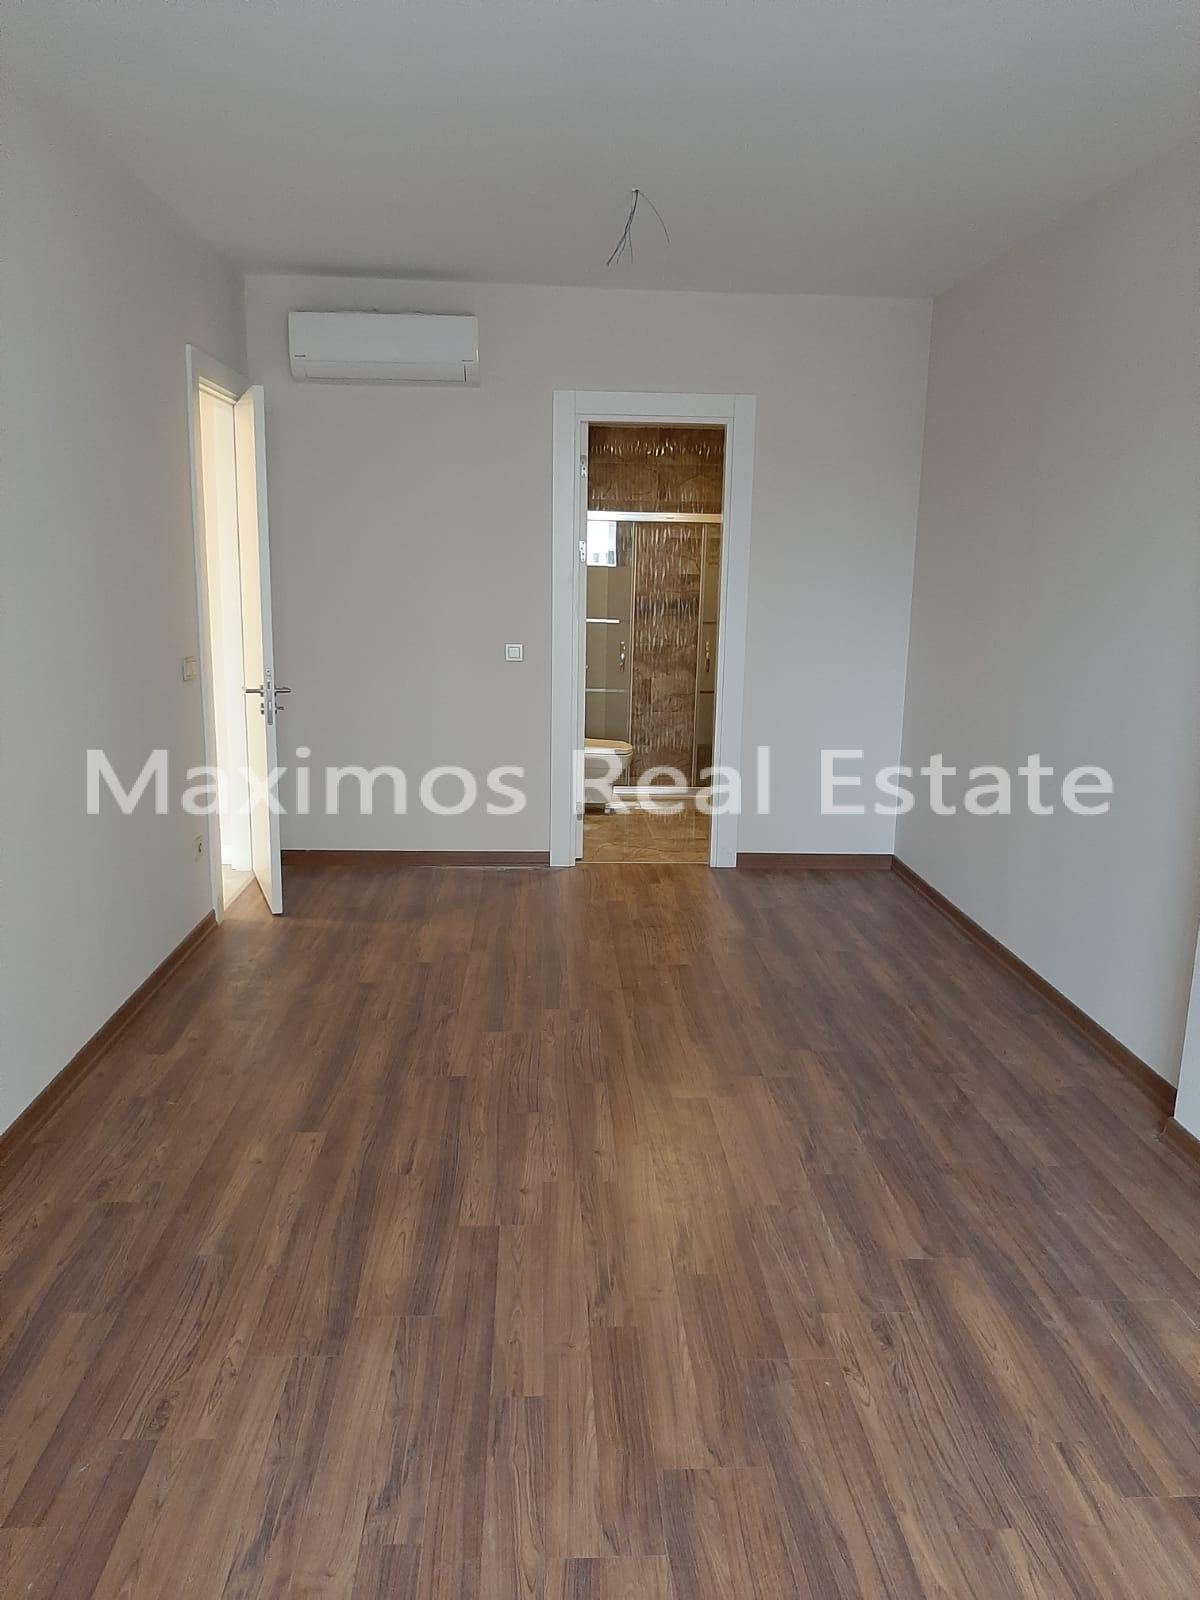 Property for Sale in Avcilar Istanbul Turkey photos #1